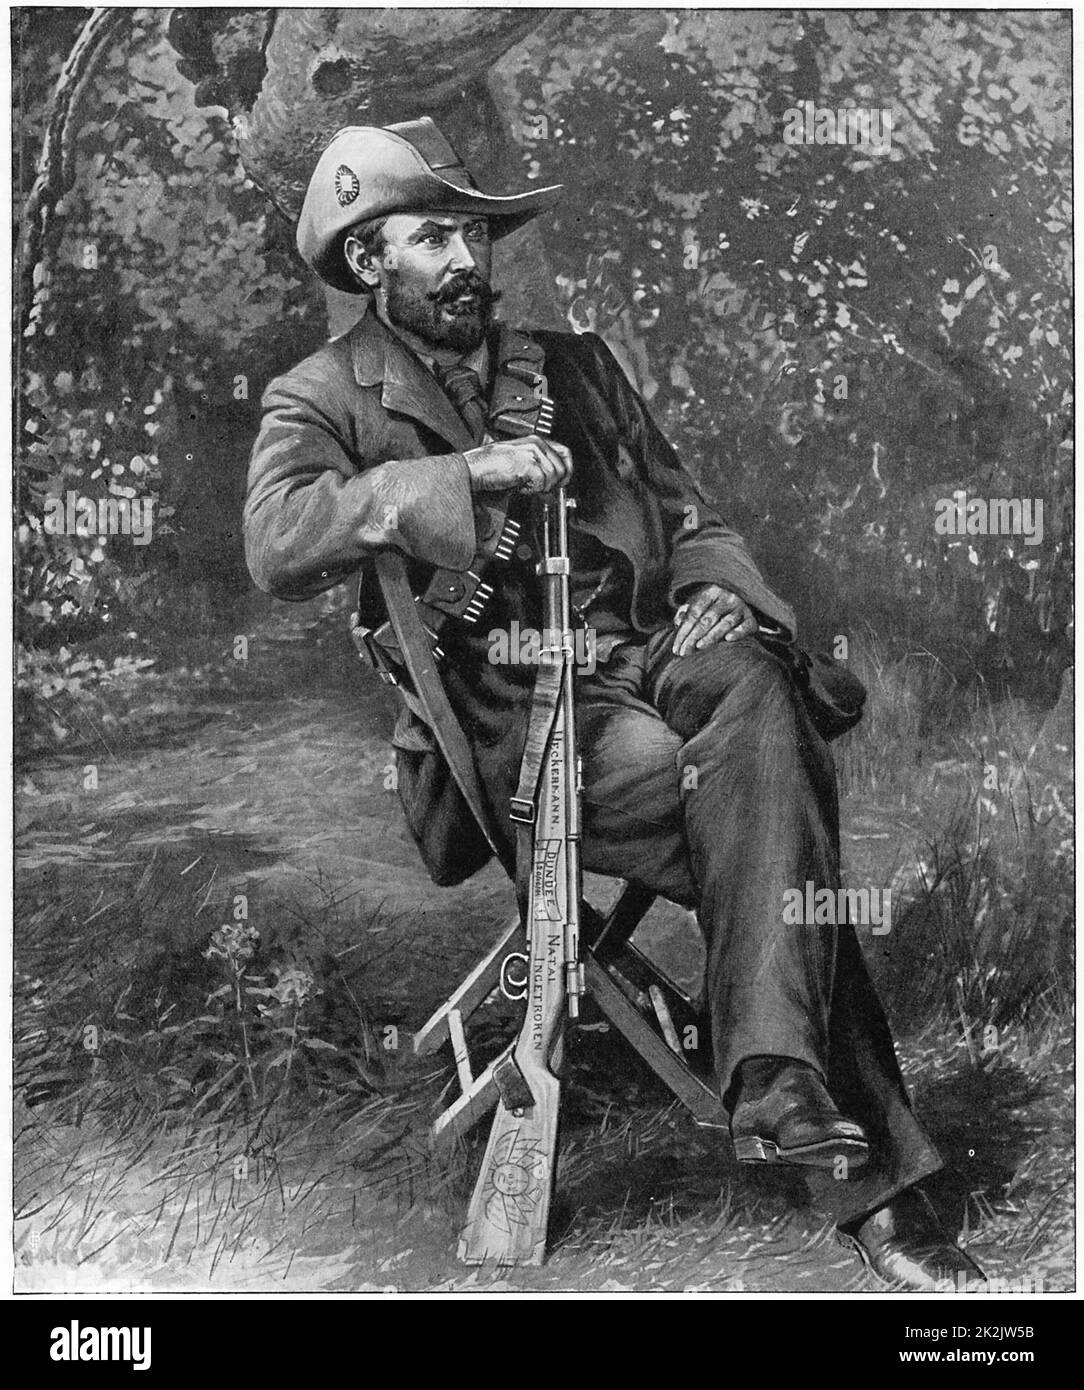 Louis Botha (1862-1919) South African soldier and statesman. Commander-in-chief of Boer forces from 1900 during 2nd Boer War (1899-1902). Botha with his decorated Mauser rifle Stock Photo